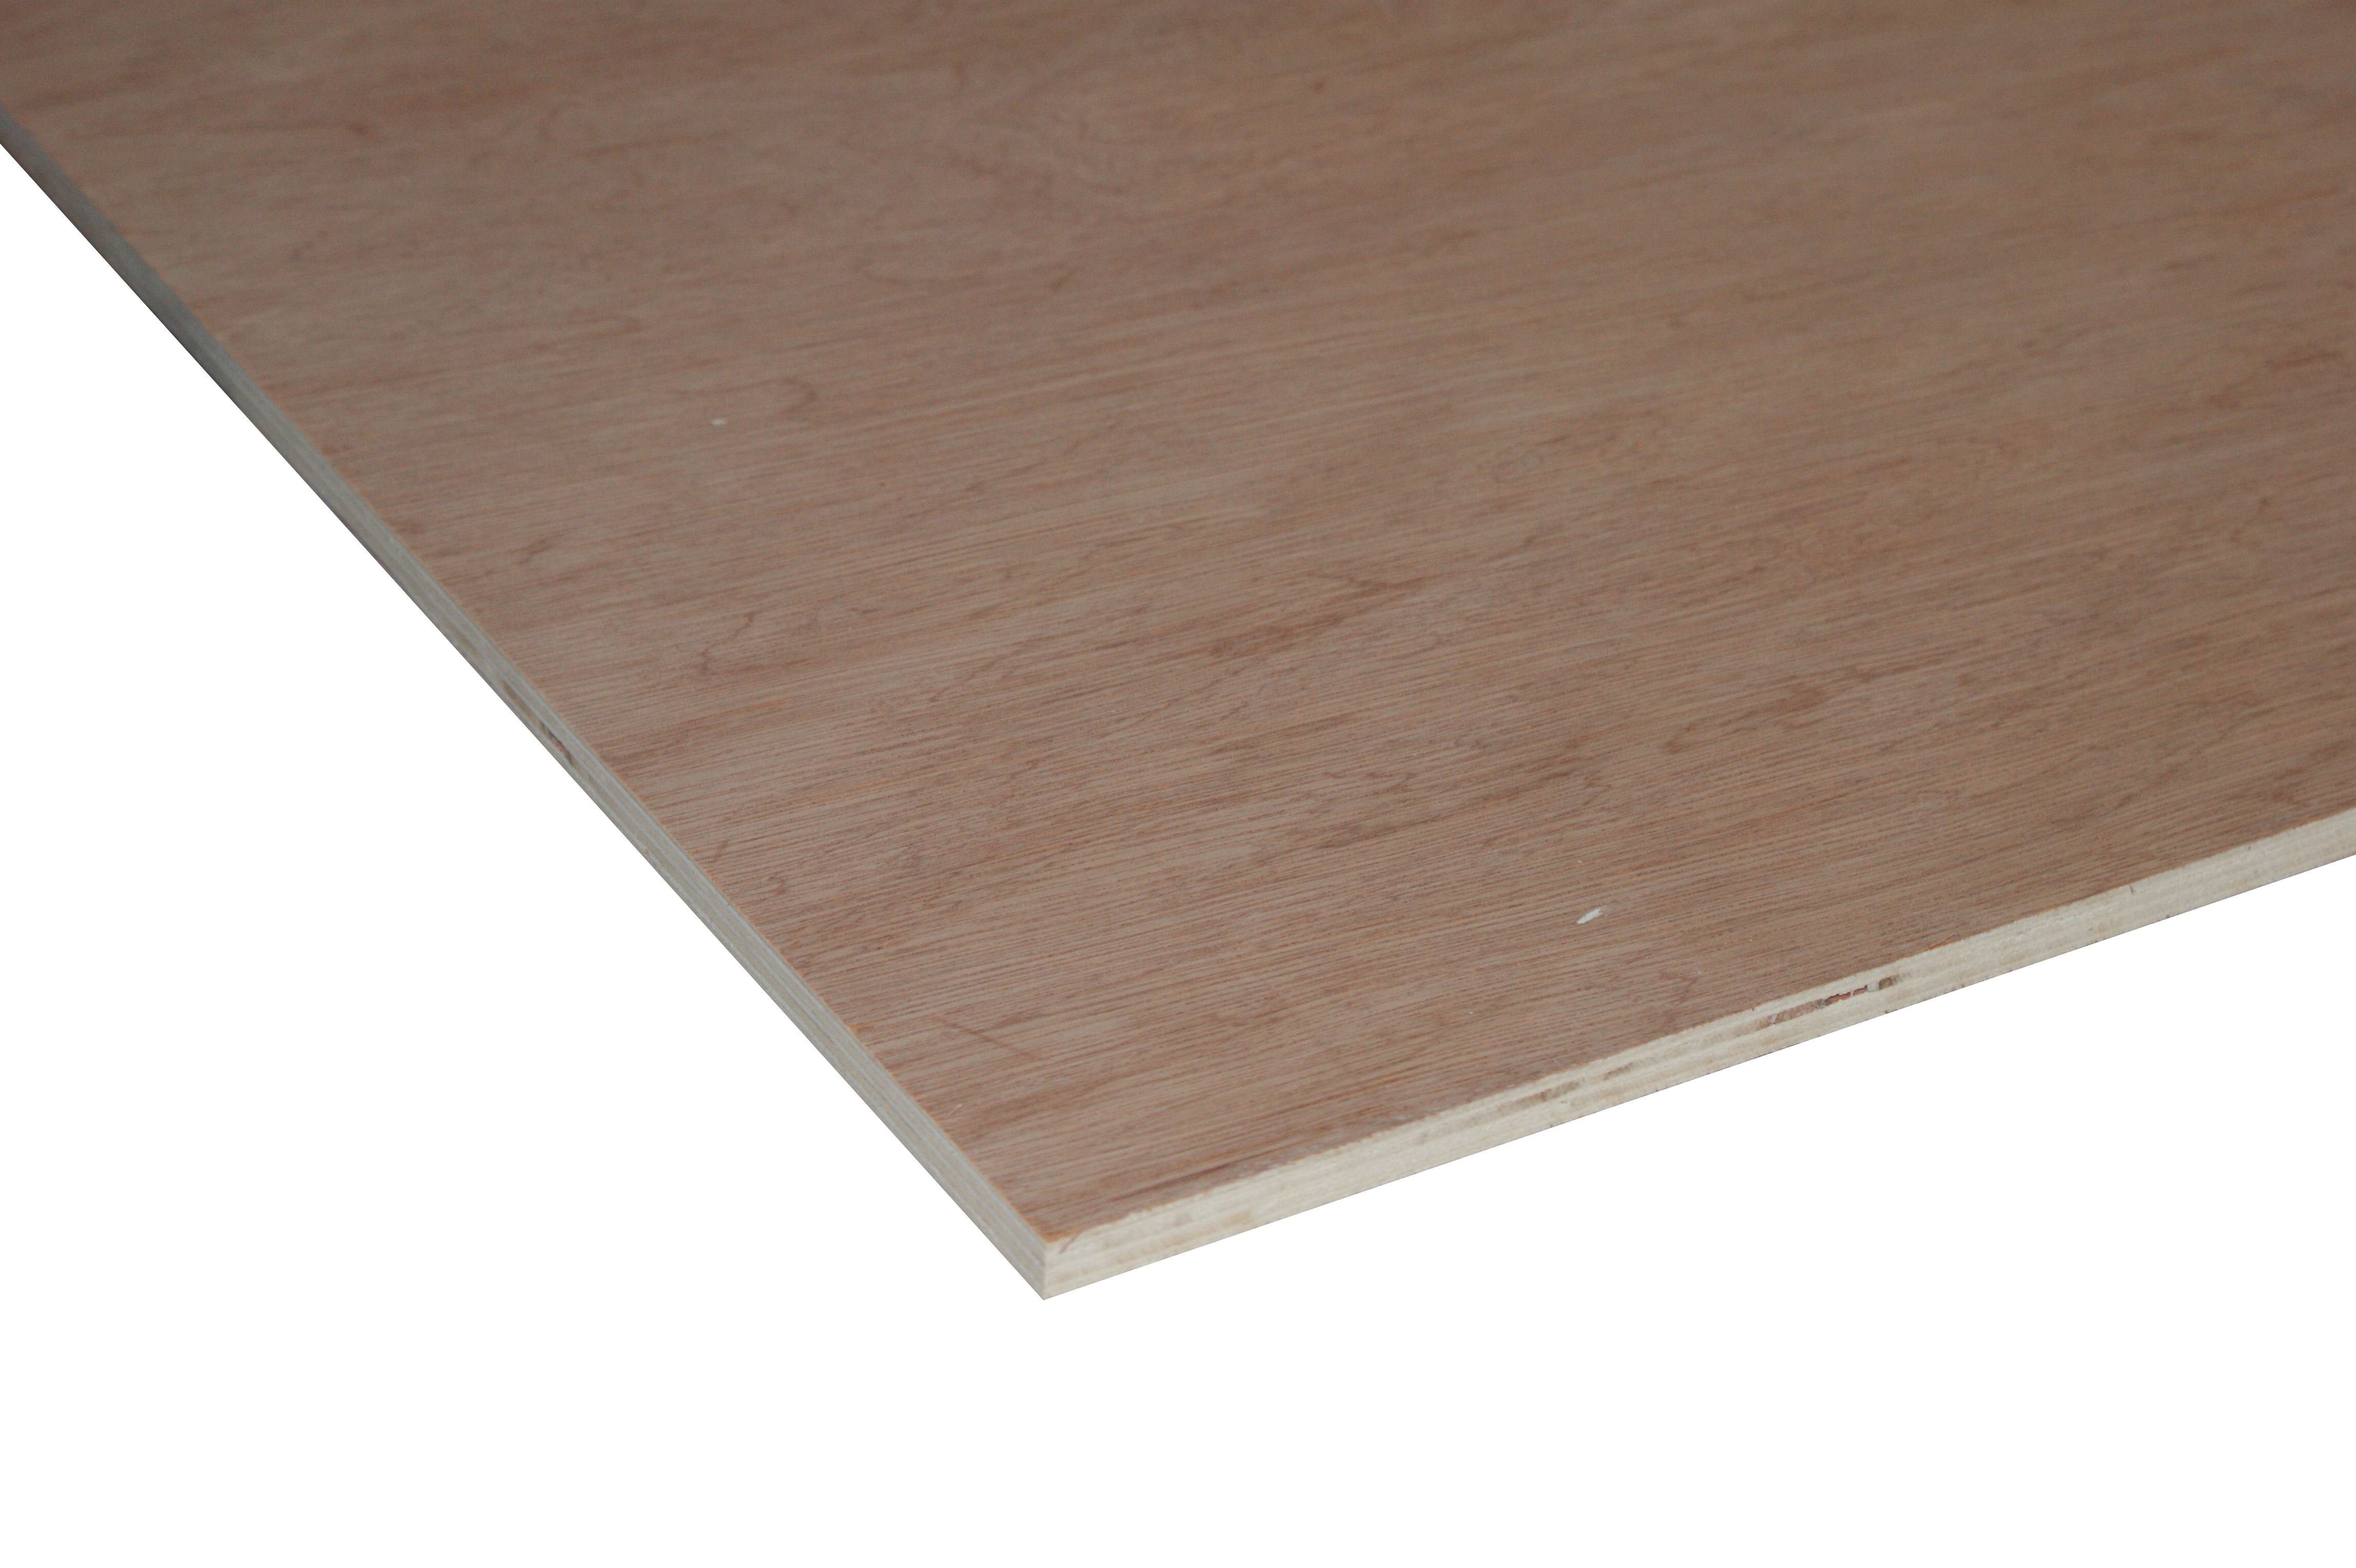 Non-Structural Hardwood Plywood Sheet - 12 x 606 x 1220mm